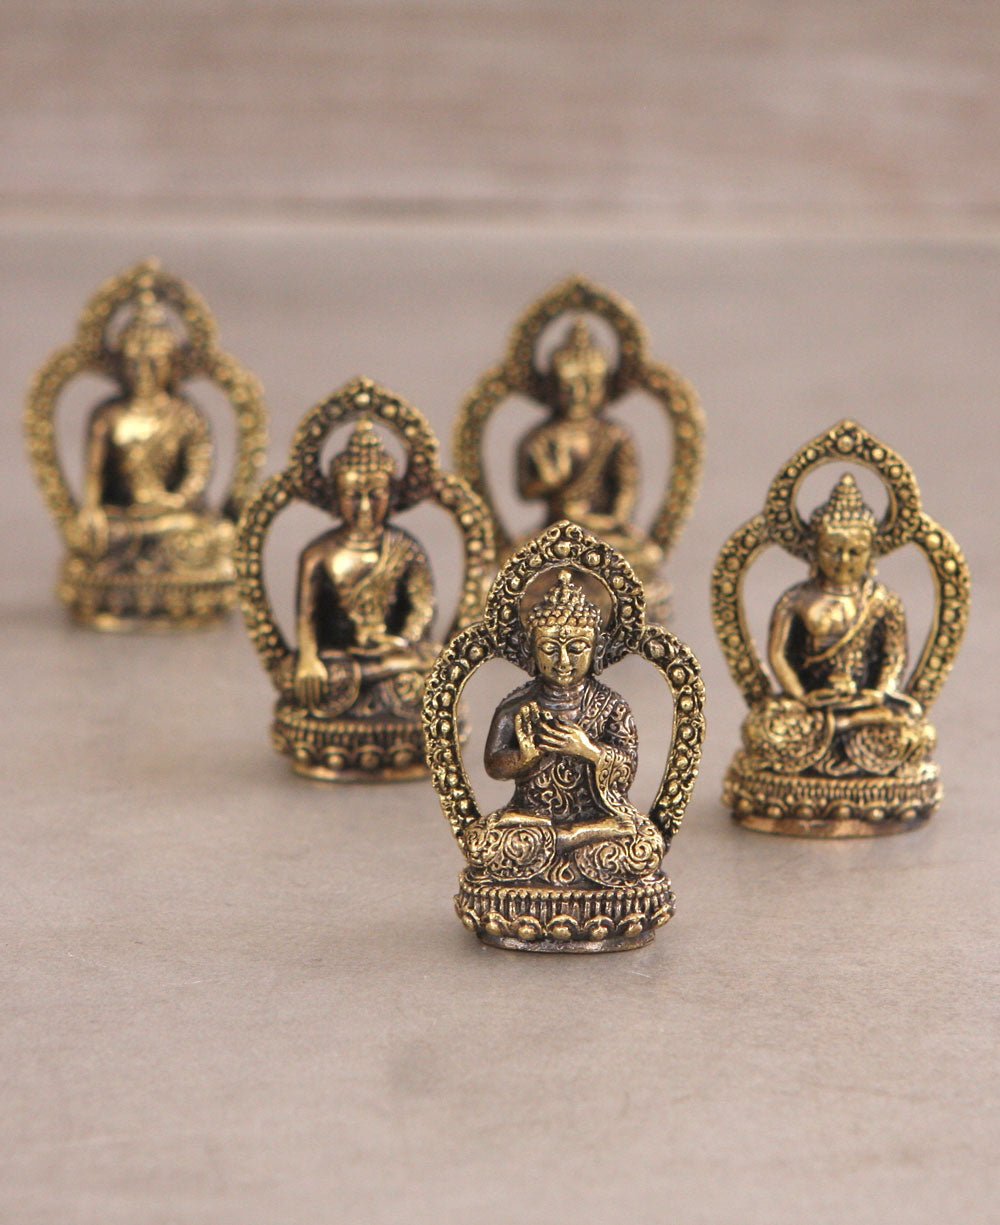 Set of 5 Small Dhyani Buddha Statues in Antique Finish - Sculptures & Statues